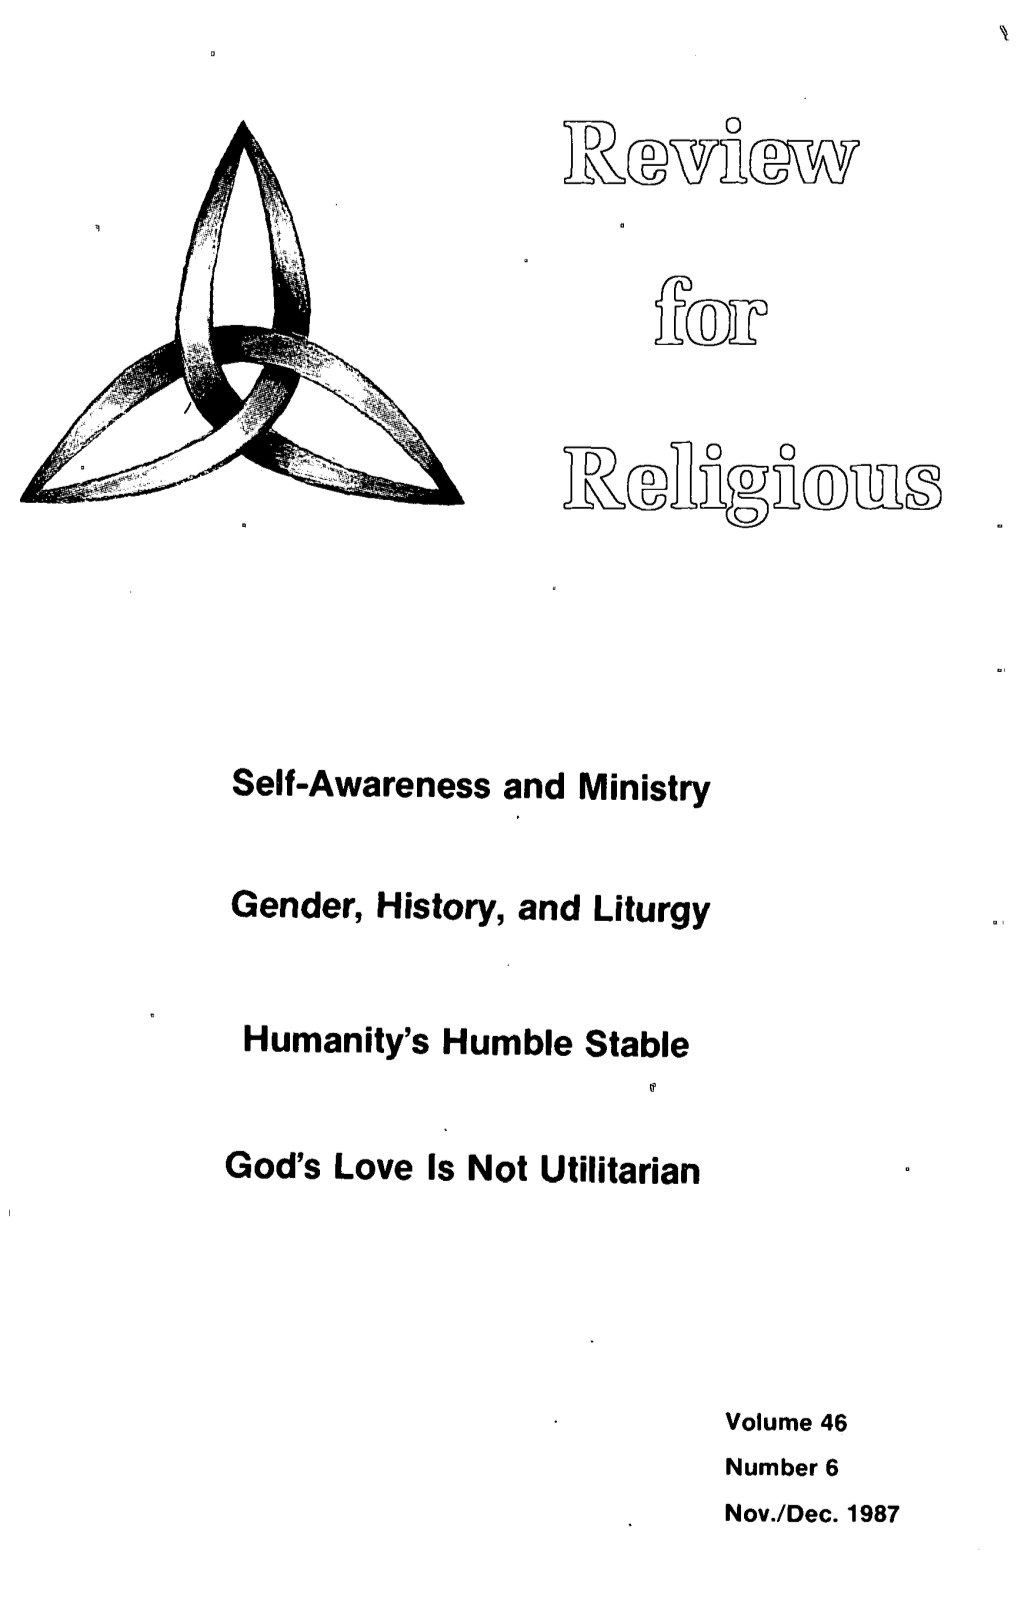 Self-Awareness and Ministry Gender, History, and Liturgy God's Love Is